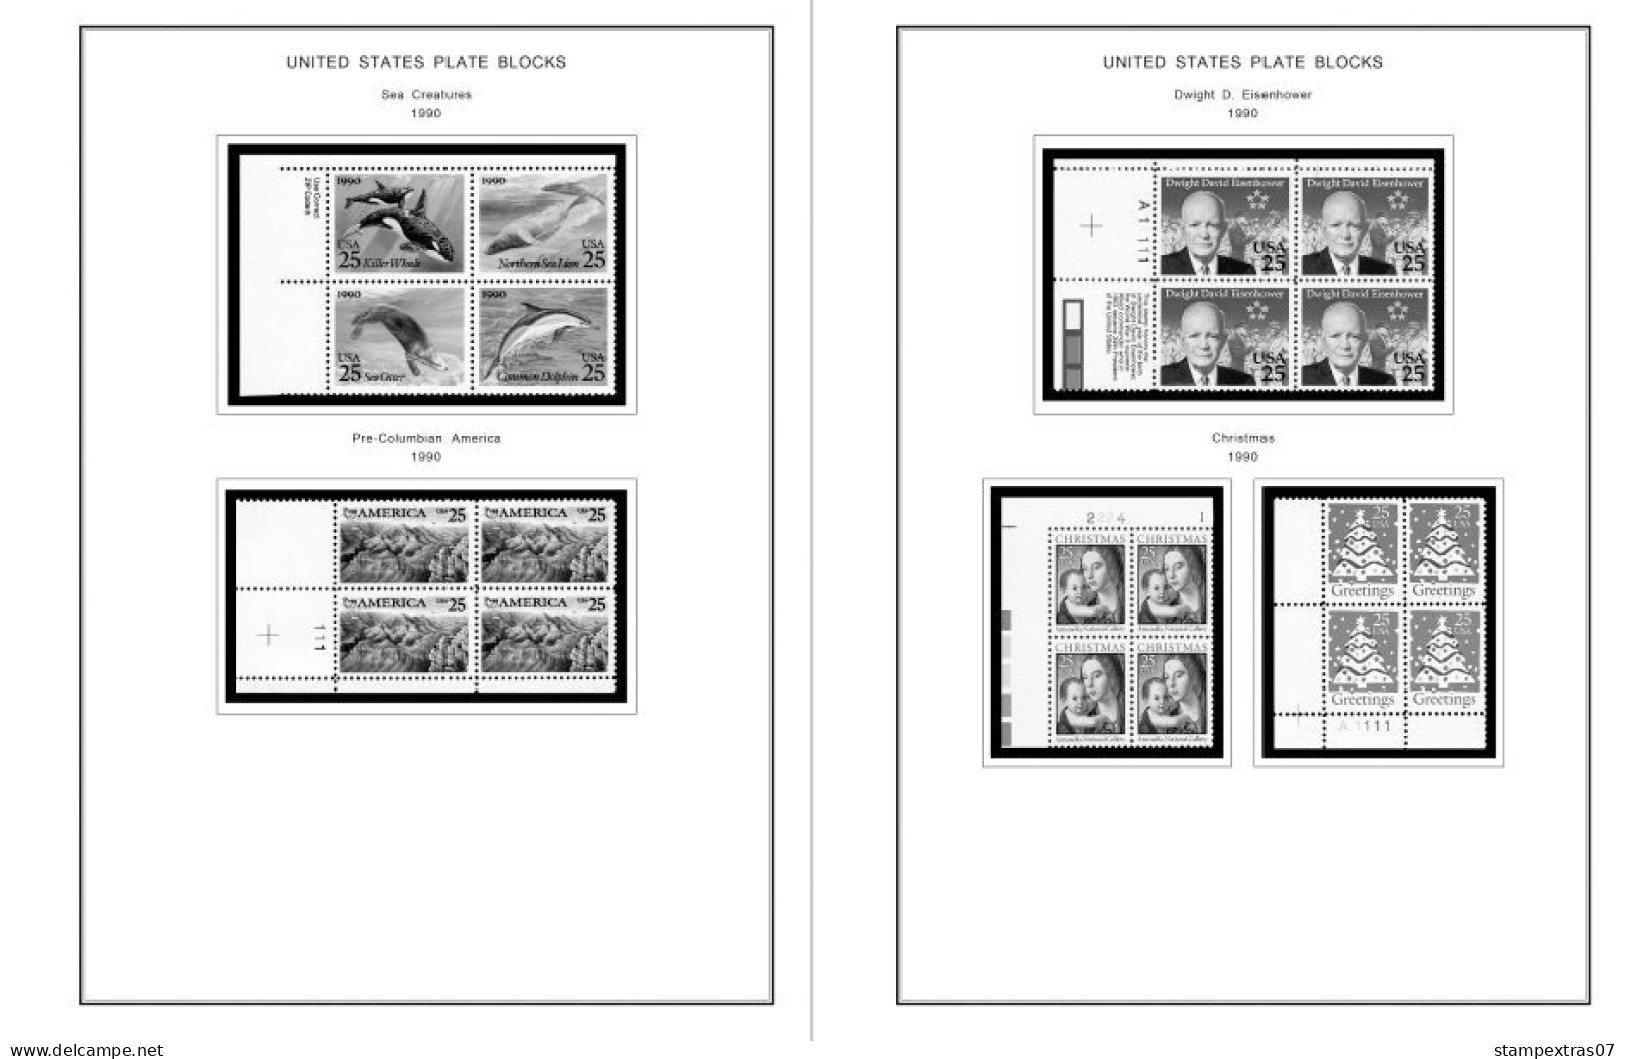 US 1990-1999 PLATE BLOCKS STAMP ALBUM PAGES (119 B&w Illustrated Pages) - English